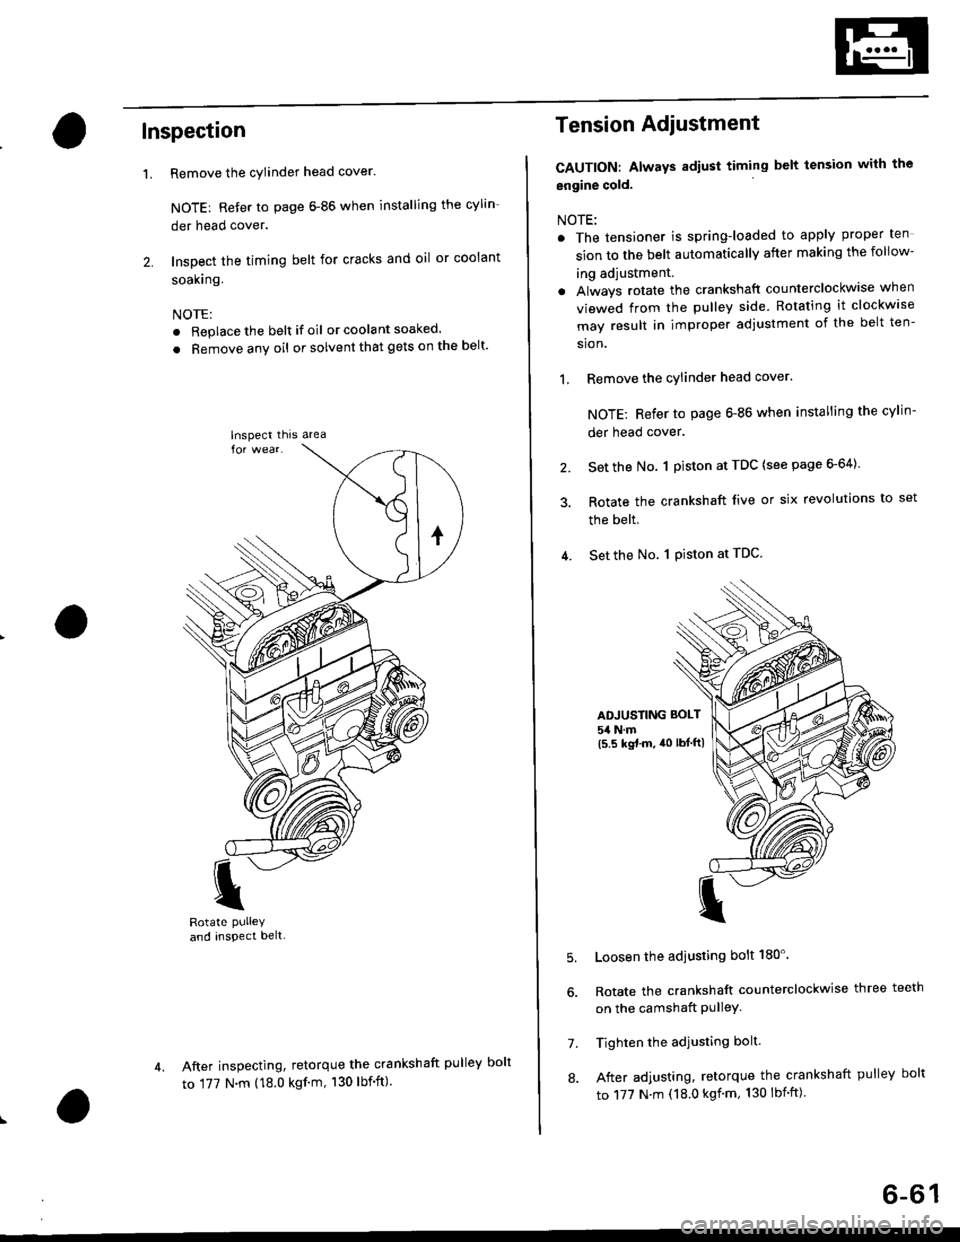 HONDA CIVIC 1996 6.G Owners Guide Inspection
Remove the cylinder head cover.
NOTE: Refer to page 6-86 when installing the cylin-
der head cover.
Inspect the timing belt for cracks and oil or coolant
soakrng.
NOTE:
. Replace the belt i